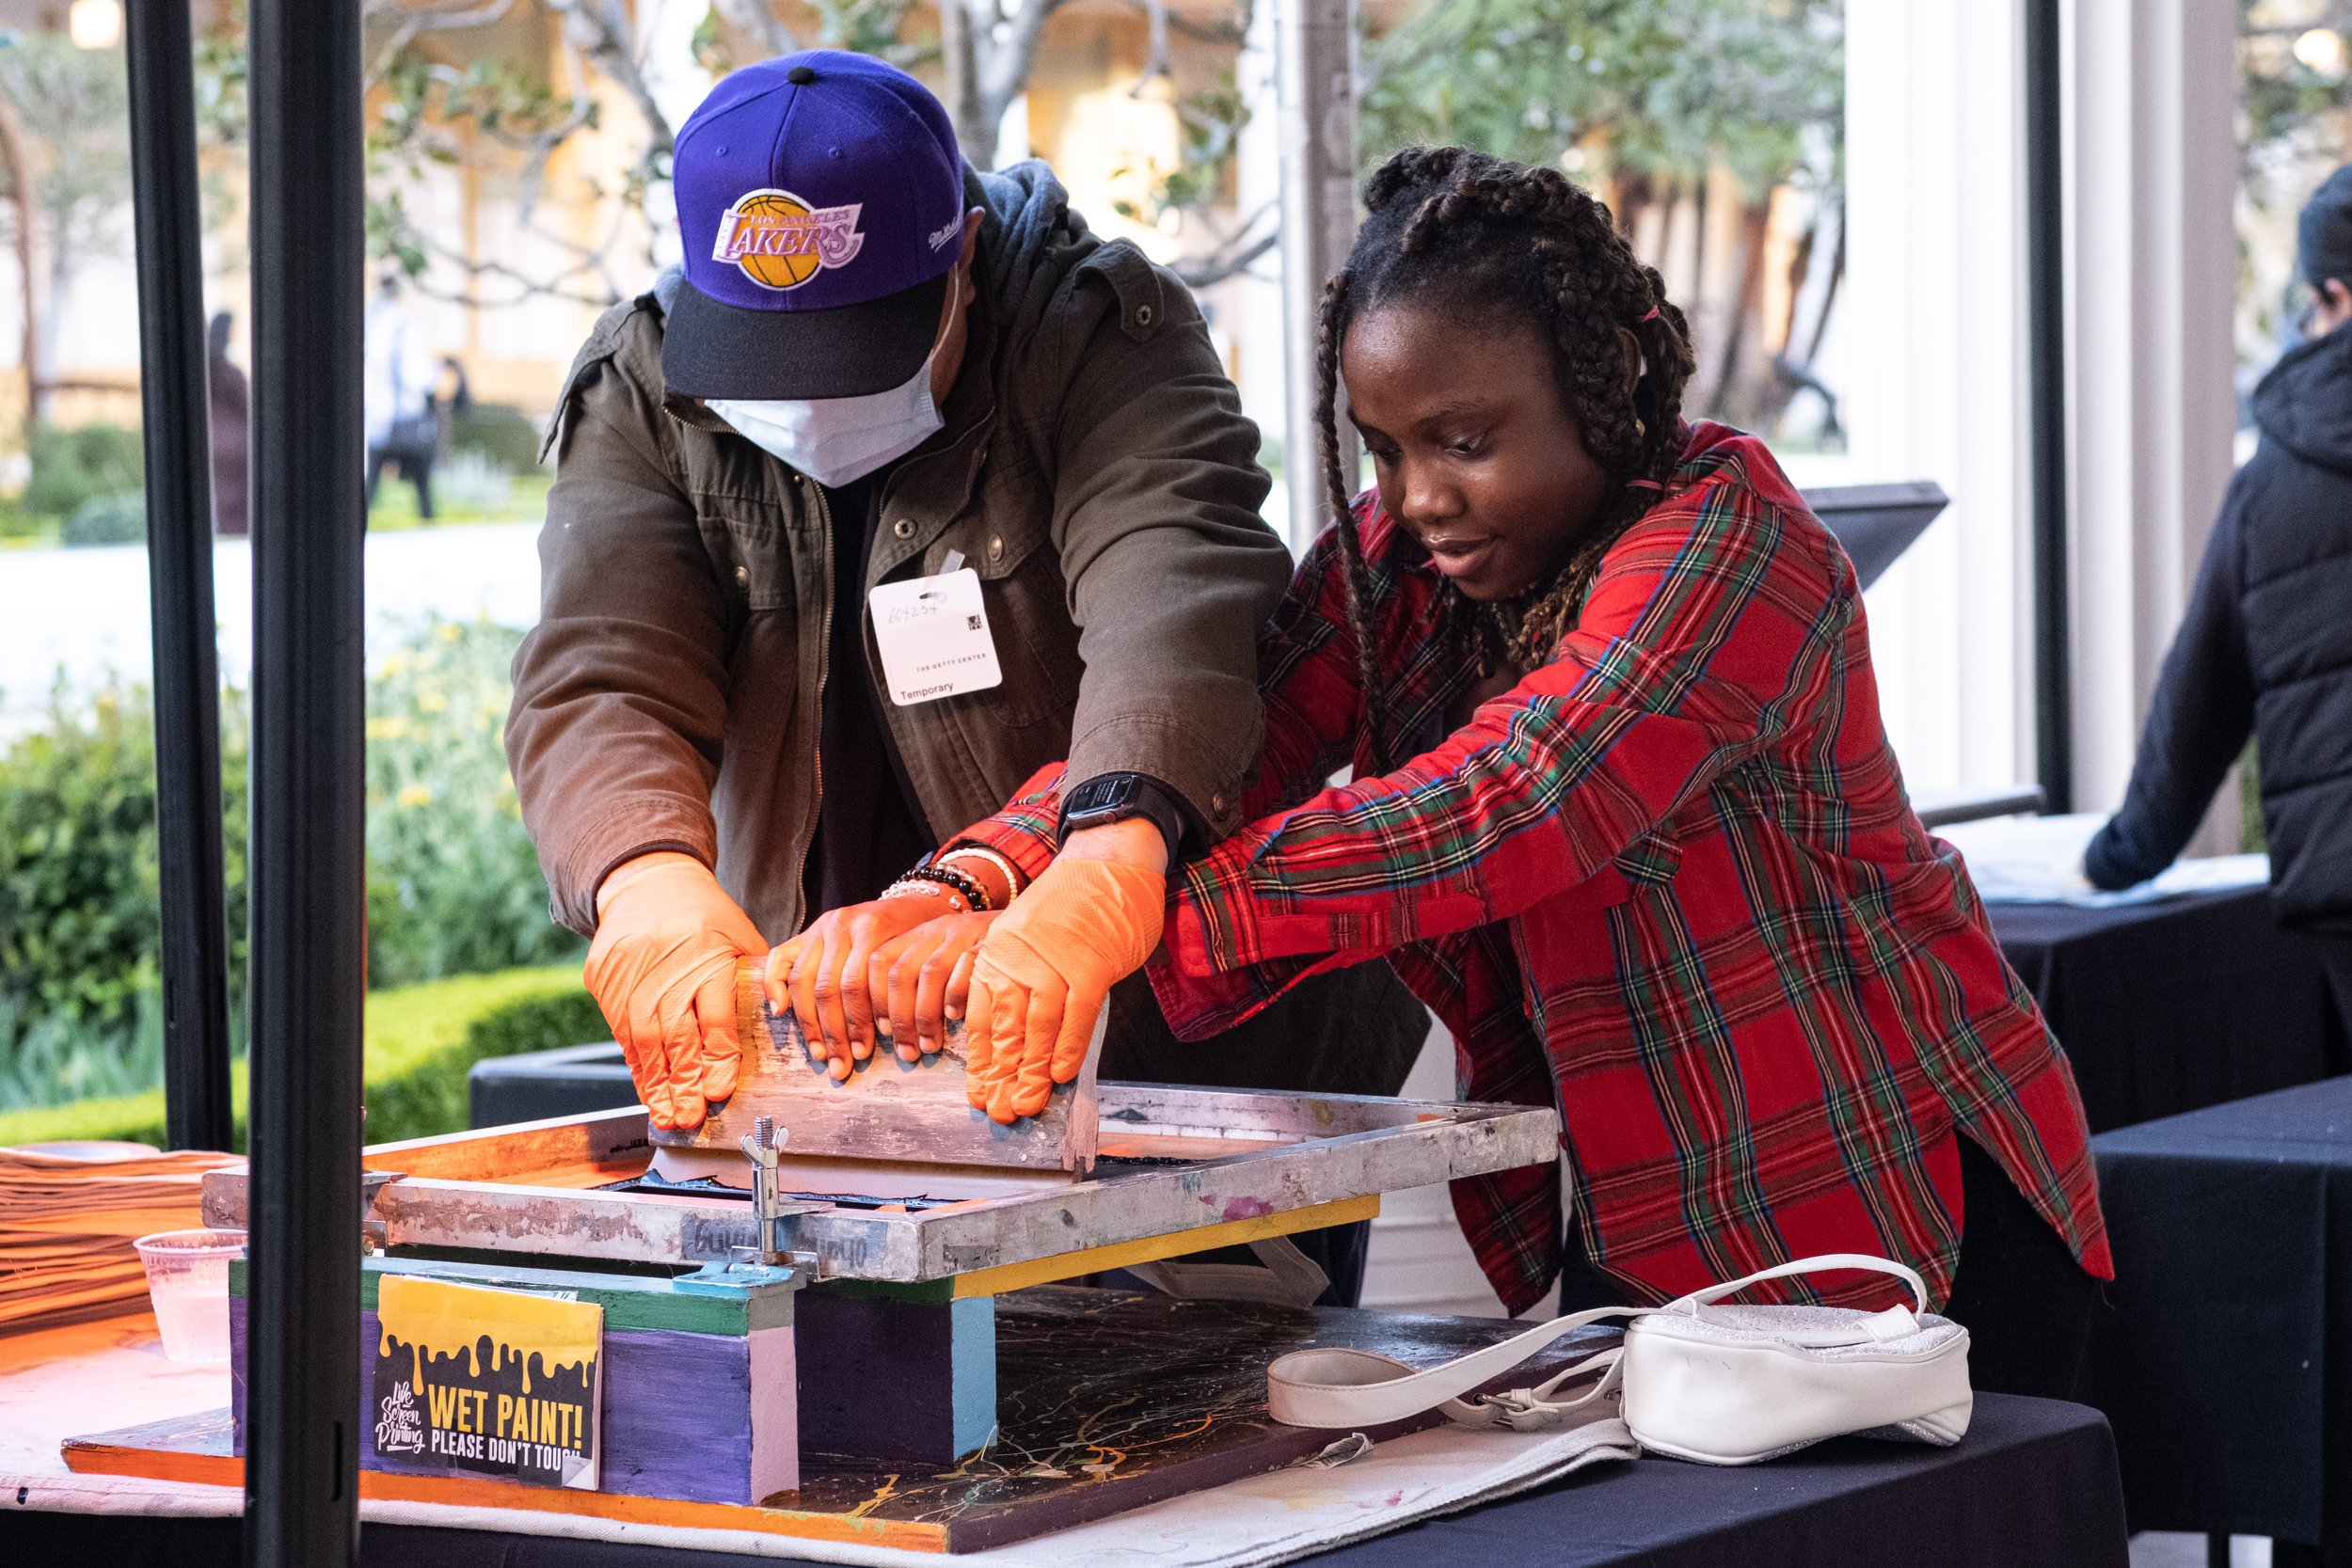  Daniella Pat-Onuoha, Biochemistry and Molecular Biology major at California Lutheran University silk screens a design onto a tote bag at College Night on Wednesday, March 22, 2023. at the Getty Villa Museum in Pacific Palisades, Calif. (Akemi Rico |